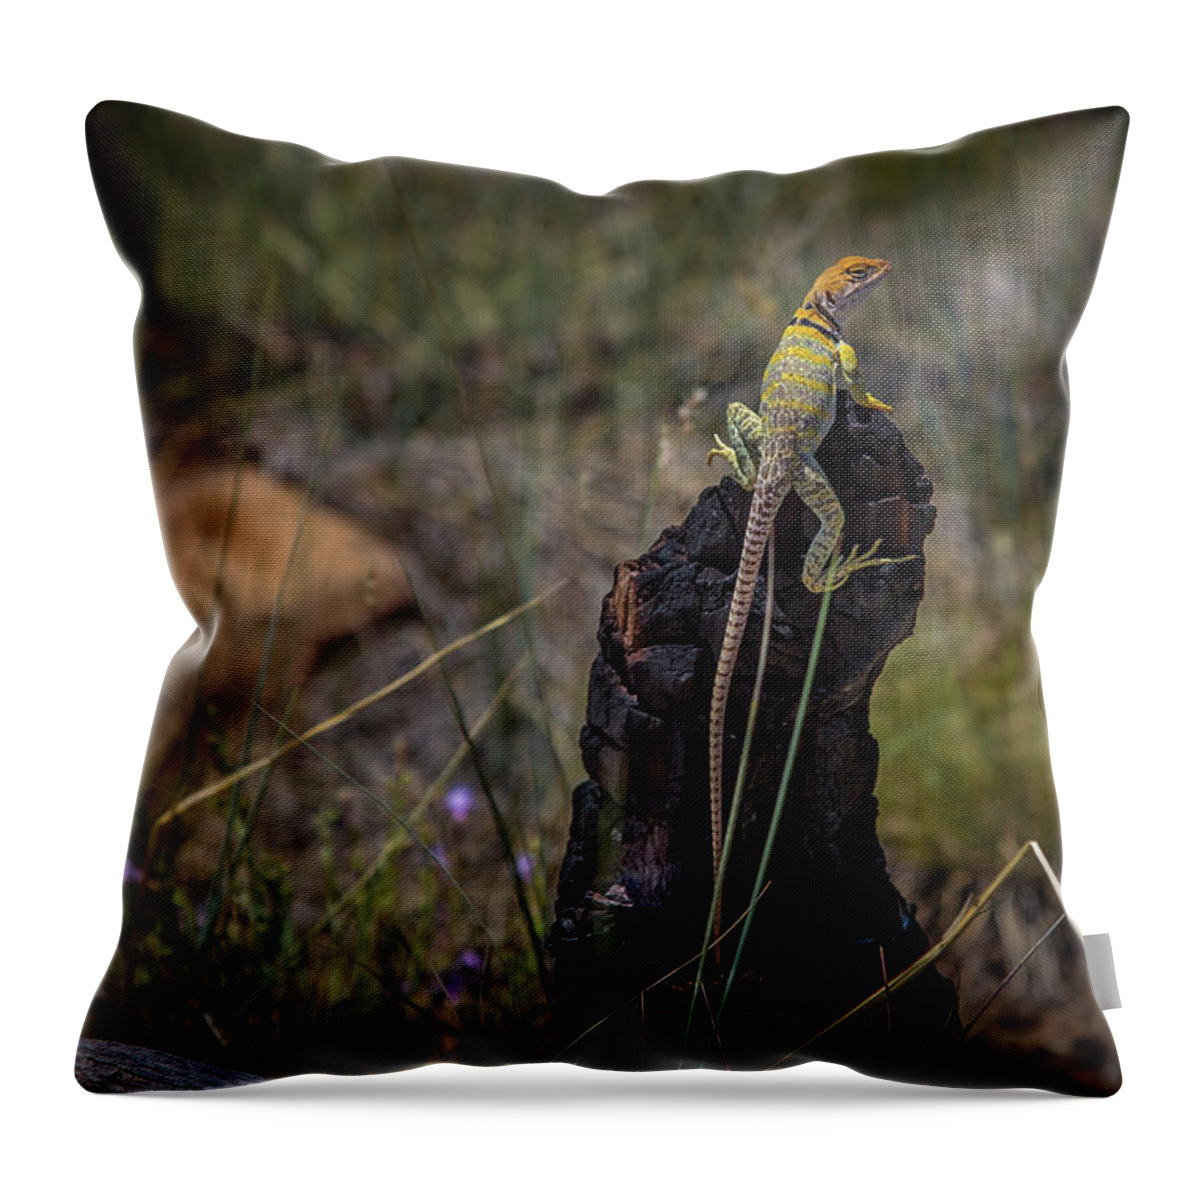 Collared Lizard Throw Pillow featuring the photograph Colored Collared Lizard by Jen Manganello